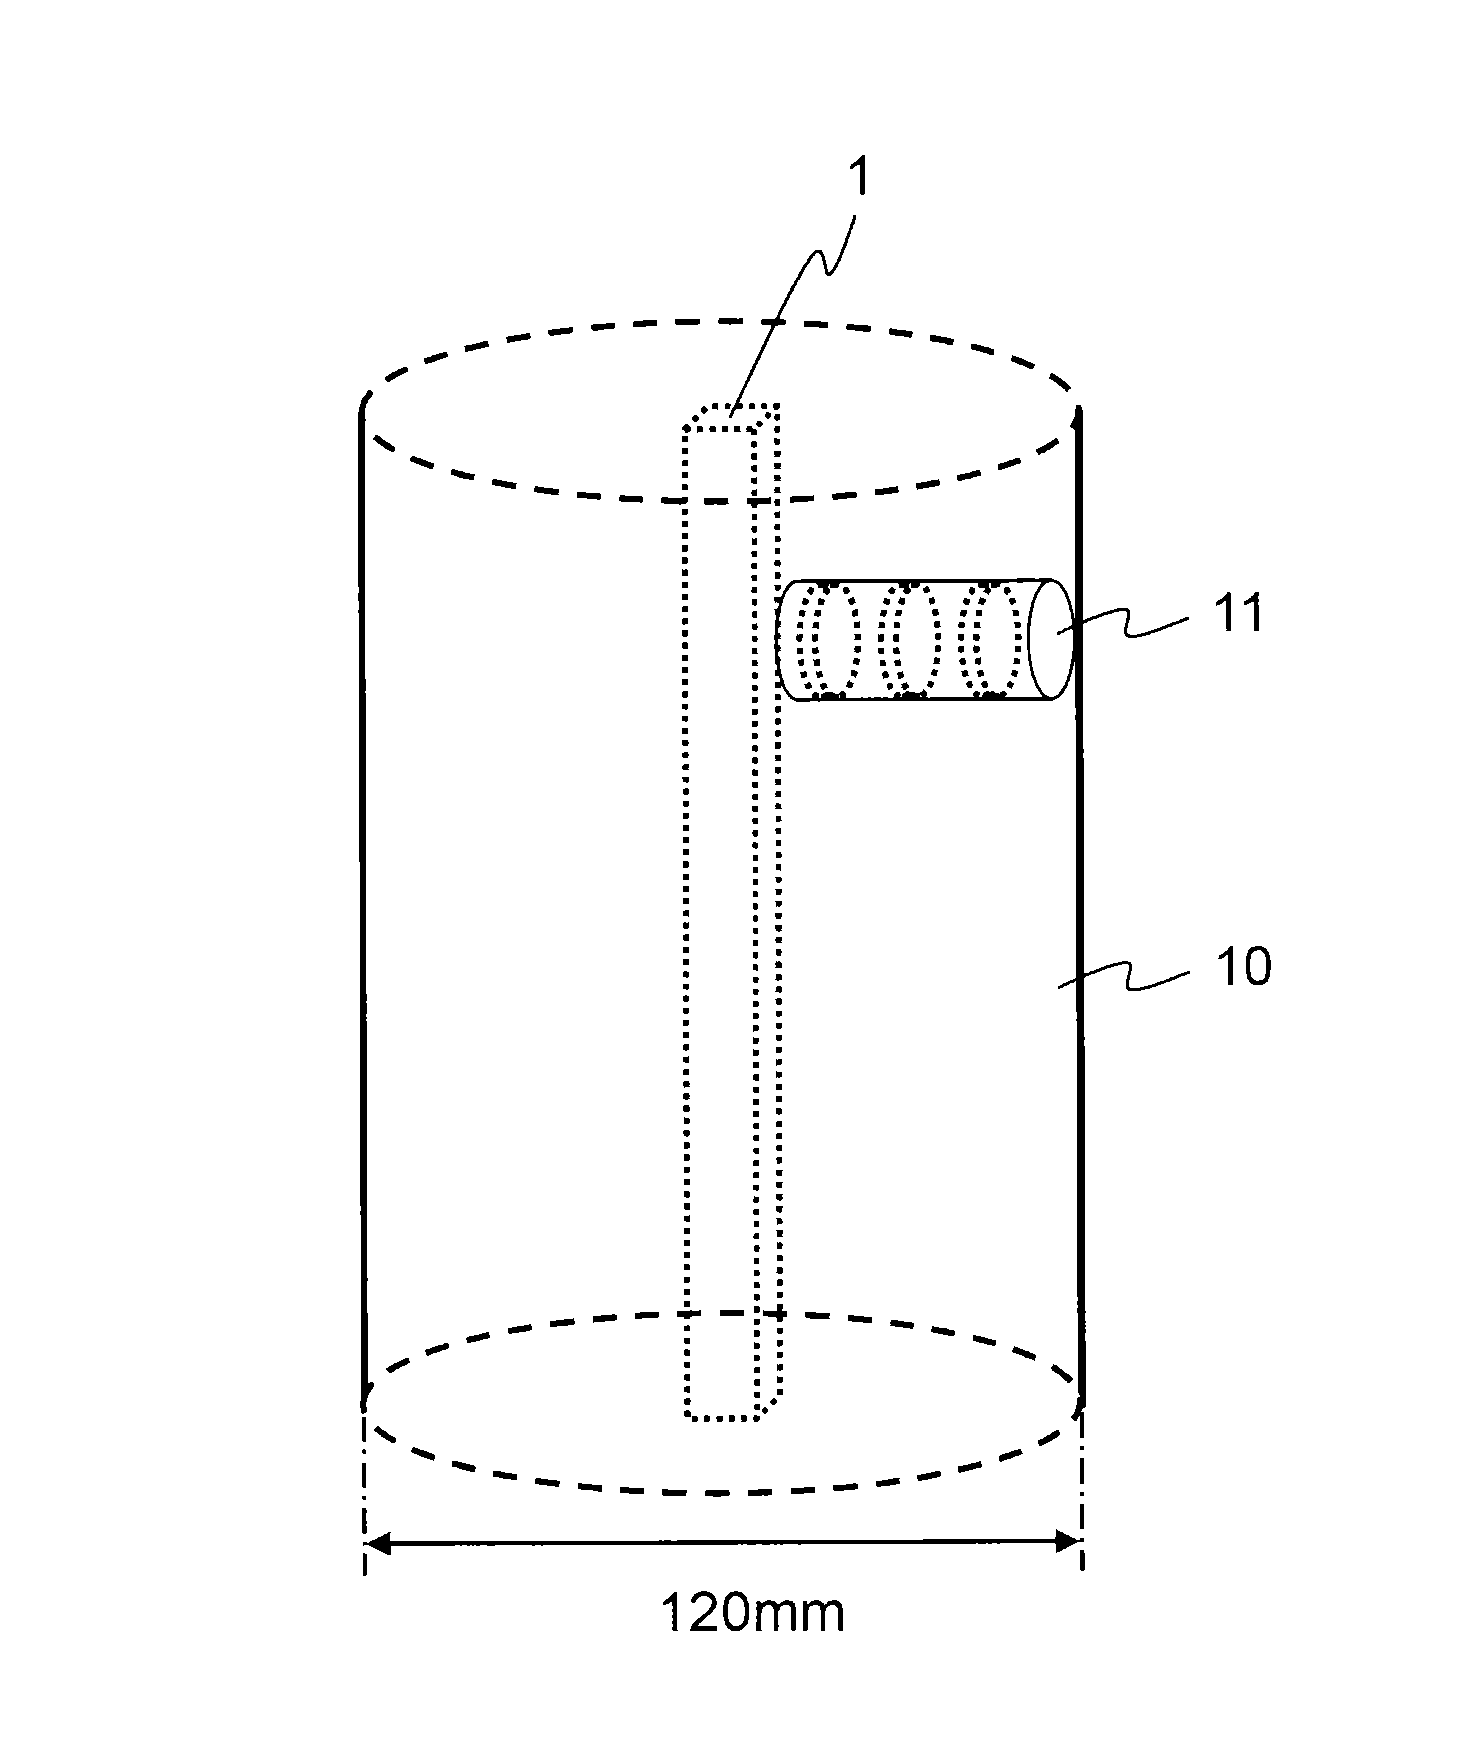 Method for evaluating degree of crystalline orientation of polycrystalline silicon, method for selecting polycrystalline silicon rod, polycrystalline silicon rod, polycrystalline silicon ingot, and method for manufacturing monocrystalline silicon